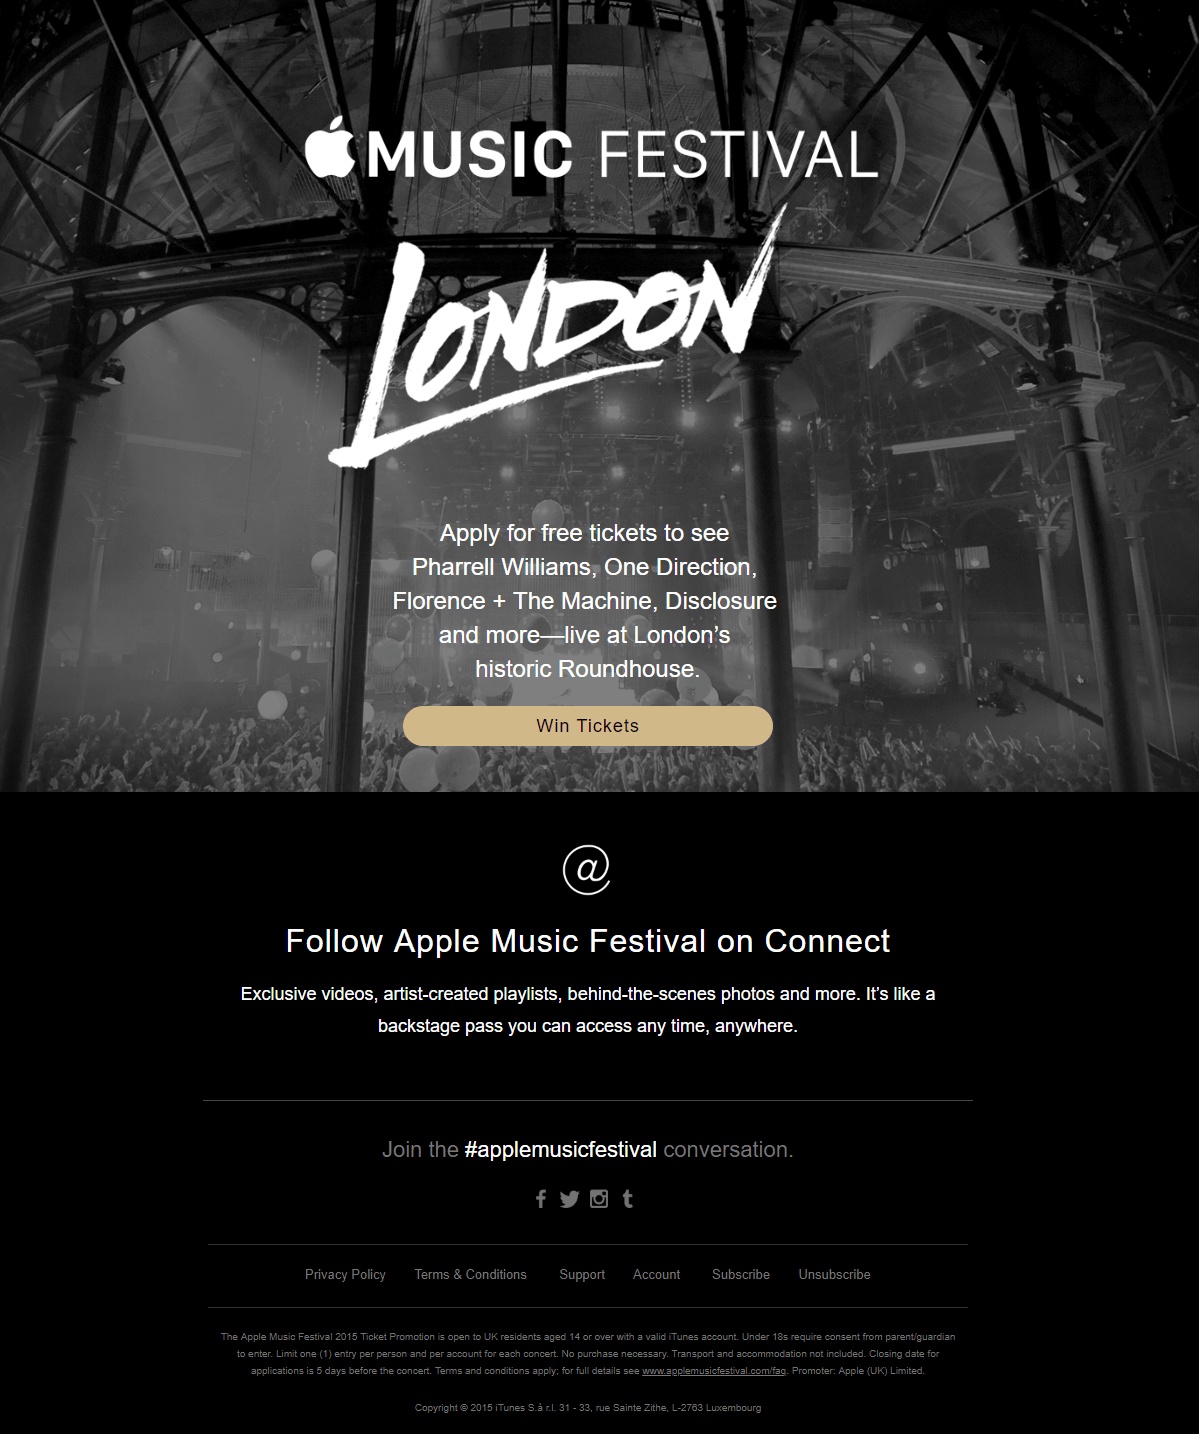 AppleMusic's giveaway email